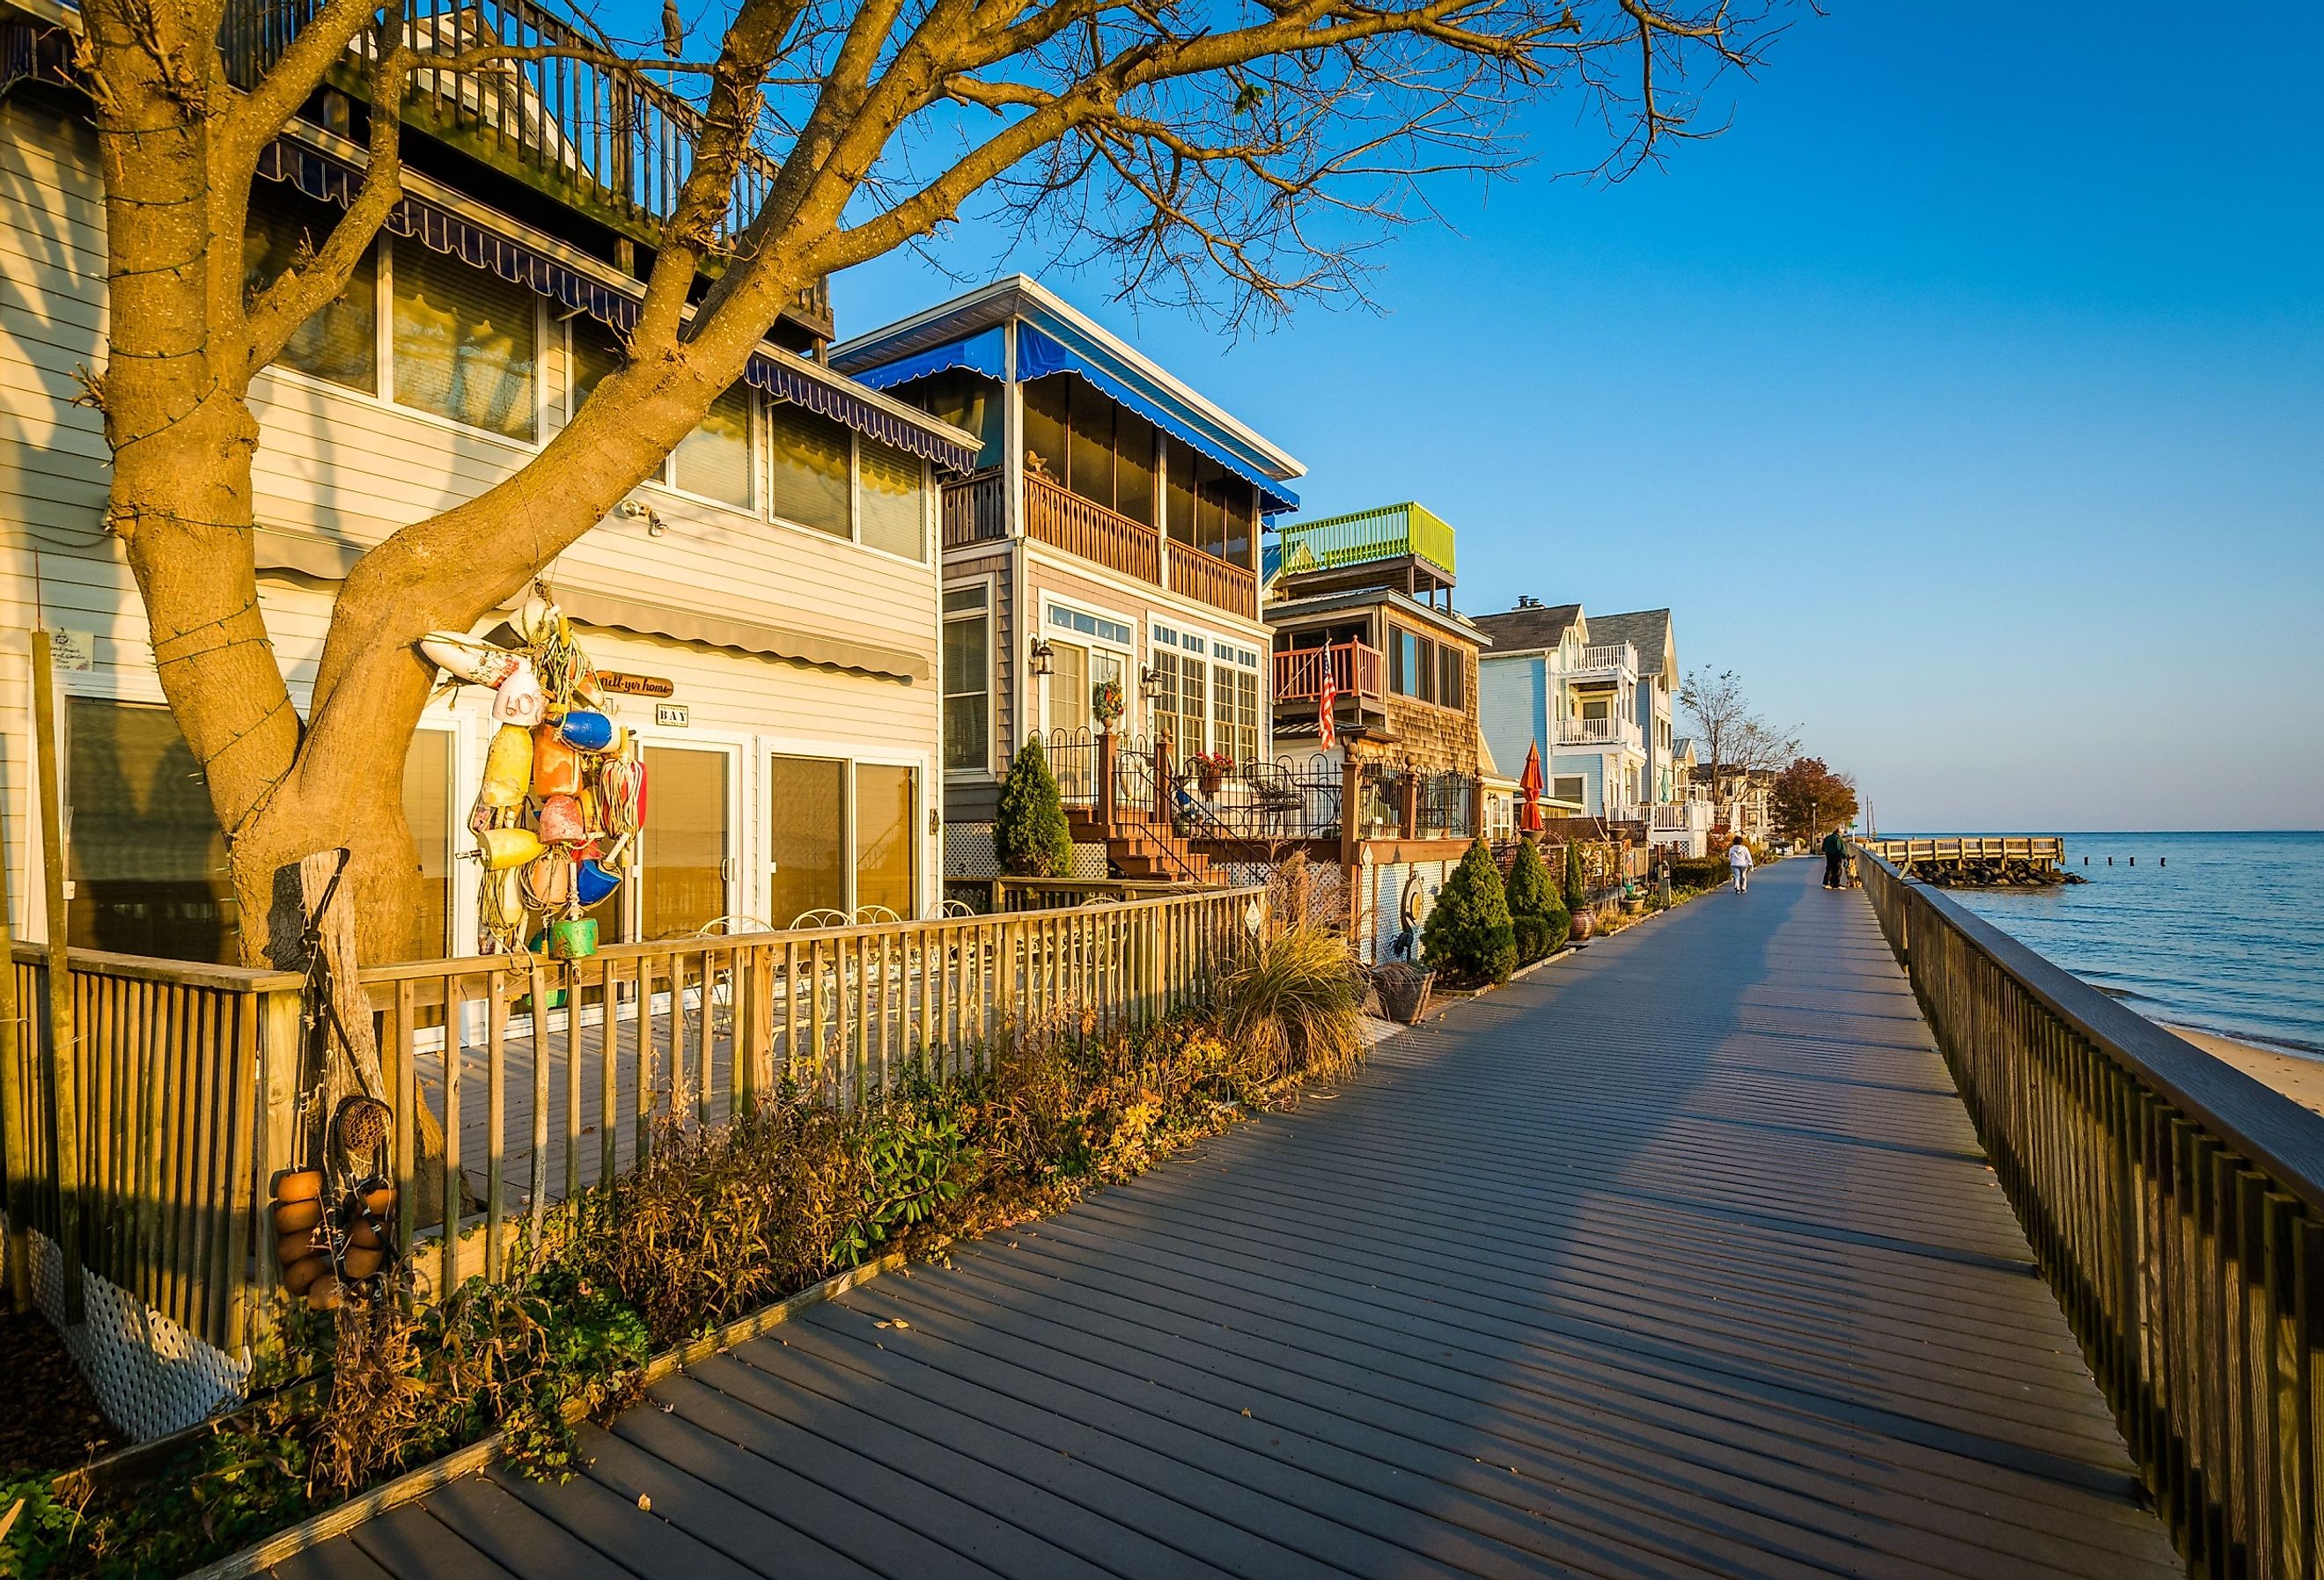 Waterfront houses and a boardwalk in North Beach, Maryland.